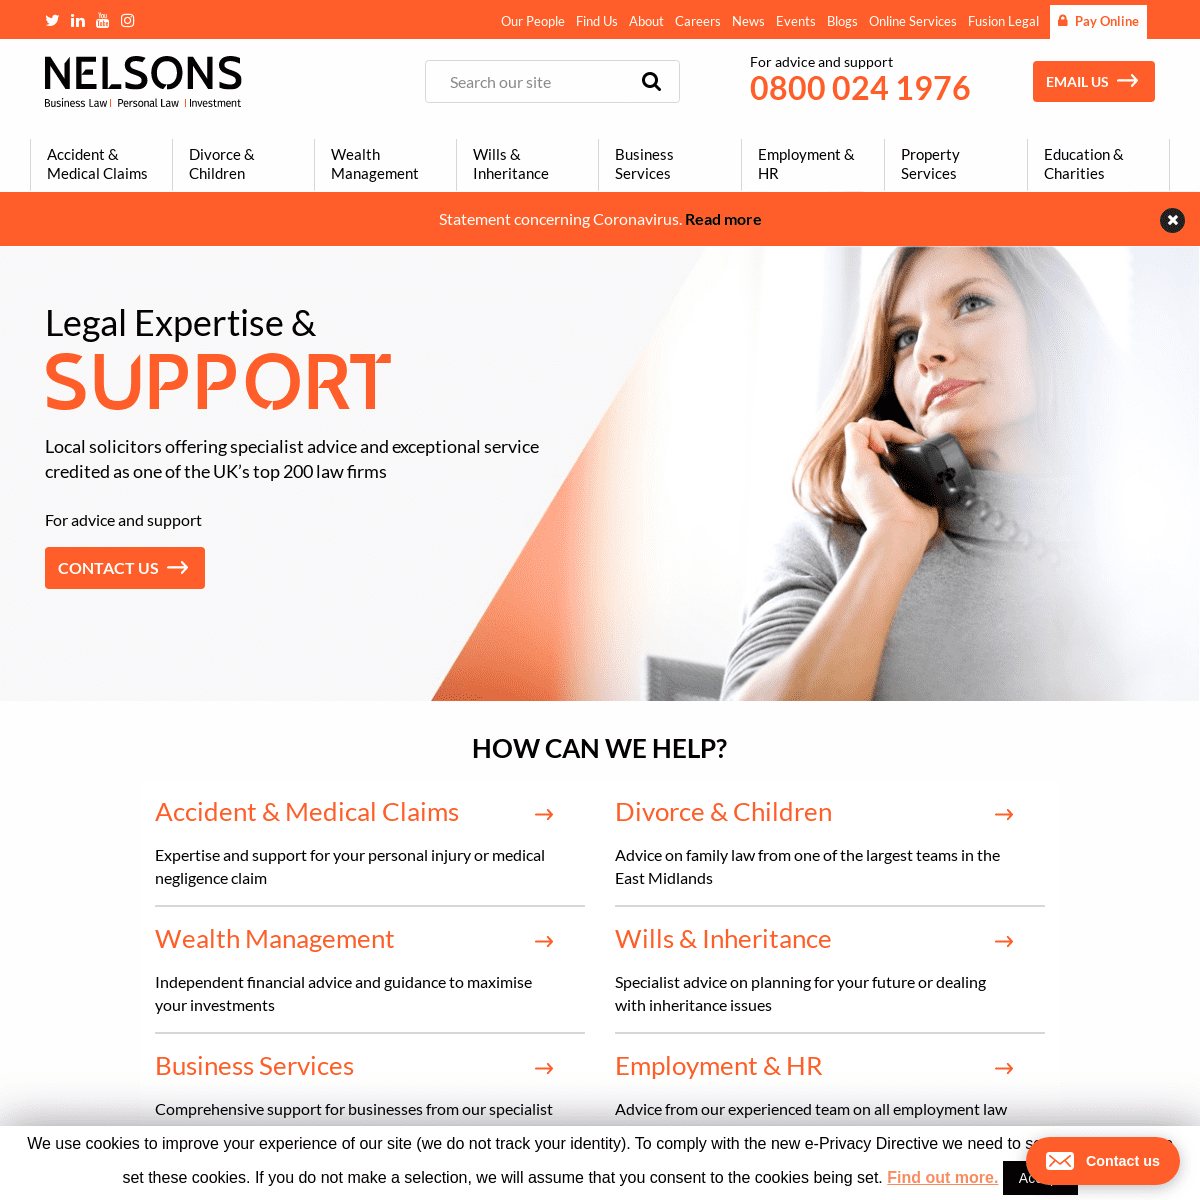 A complete backup of nelsonslaw.co.uk